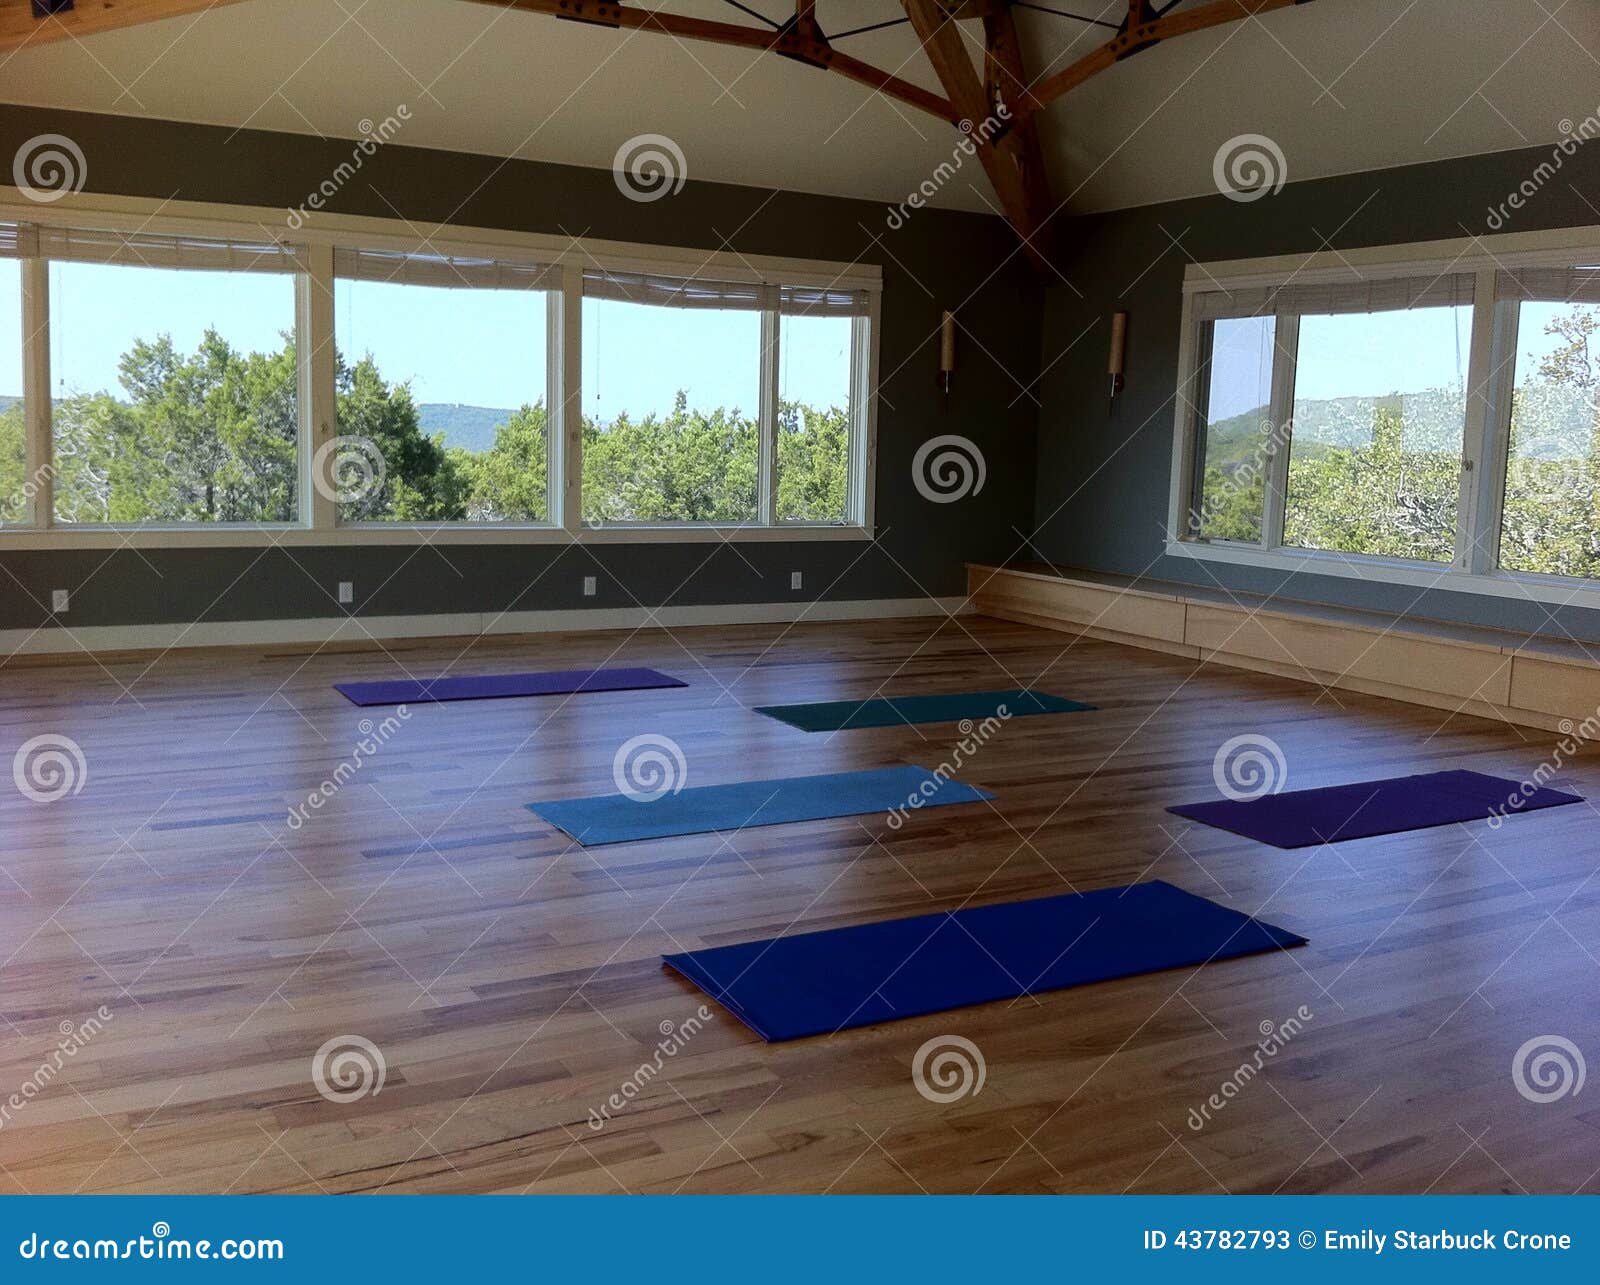 Yoga Mats In A Studio Classroom With Wood Floors Stock Image